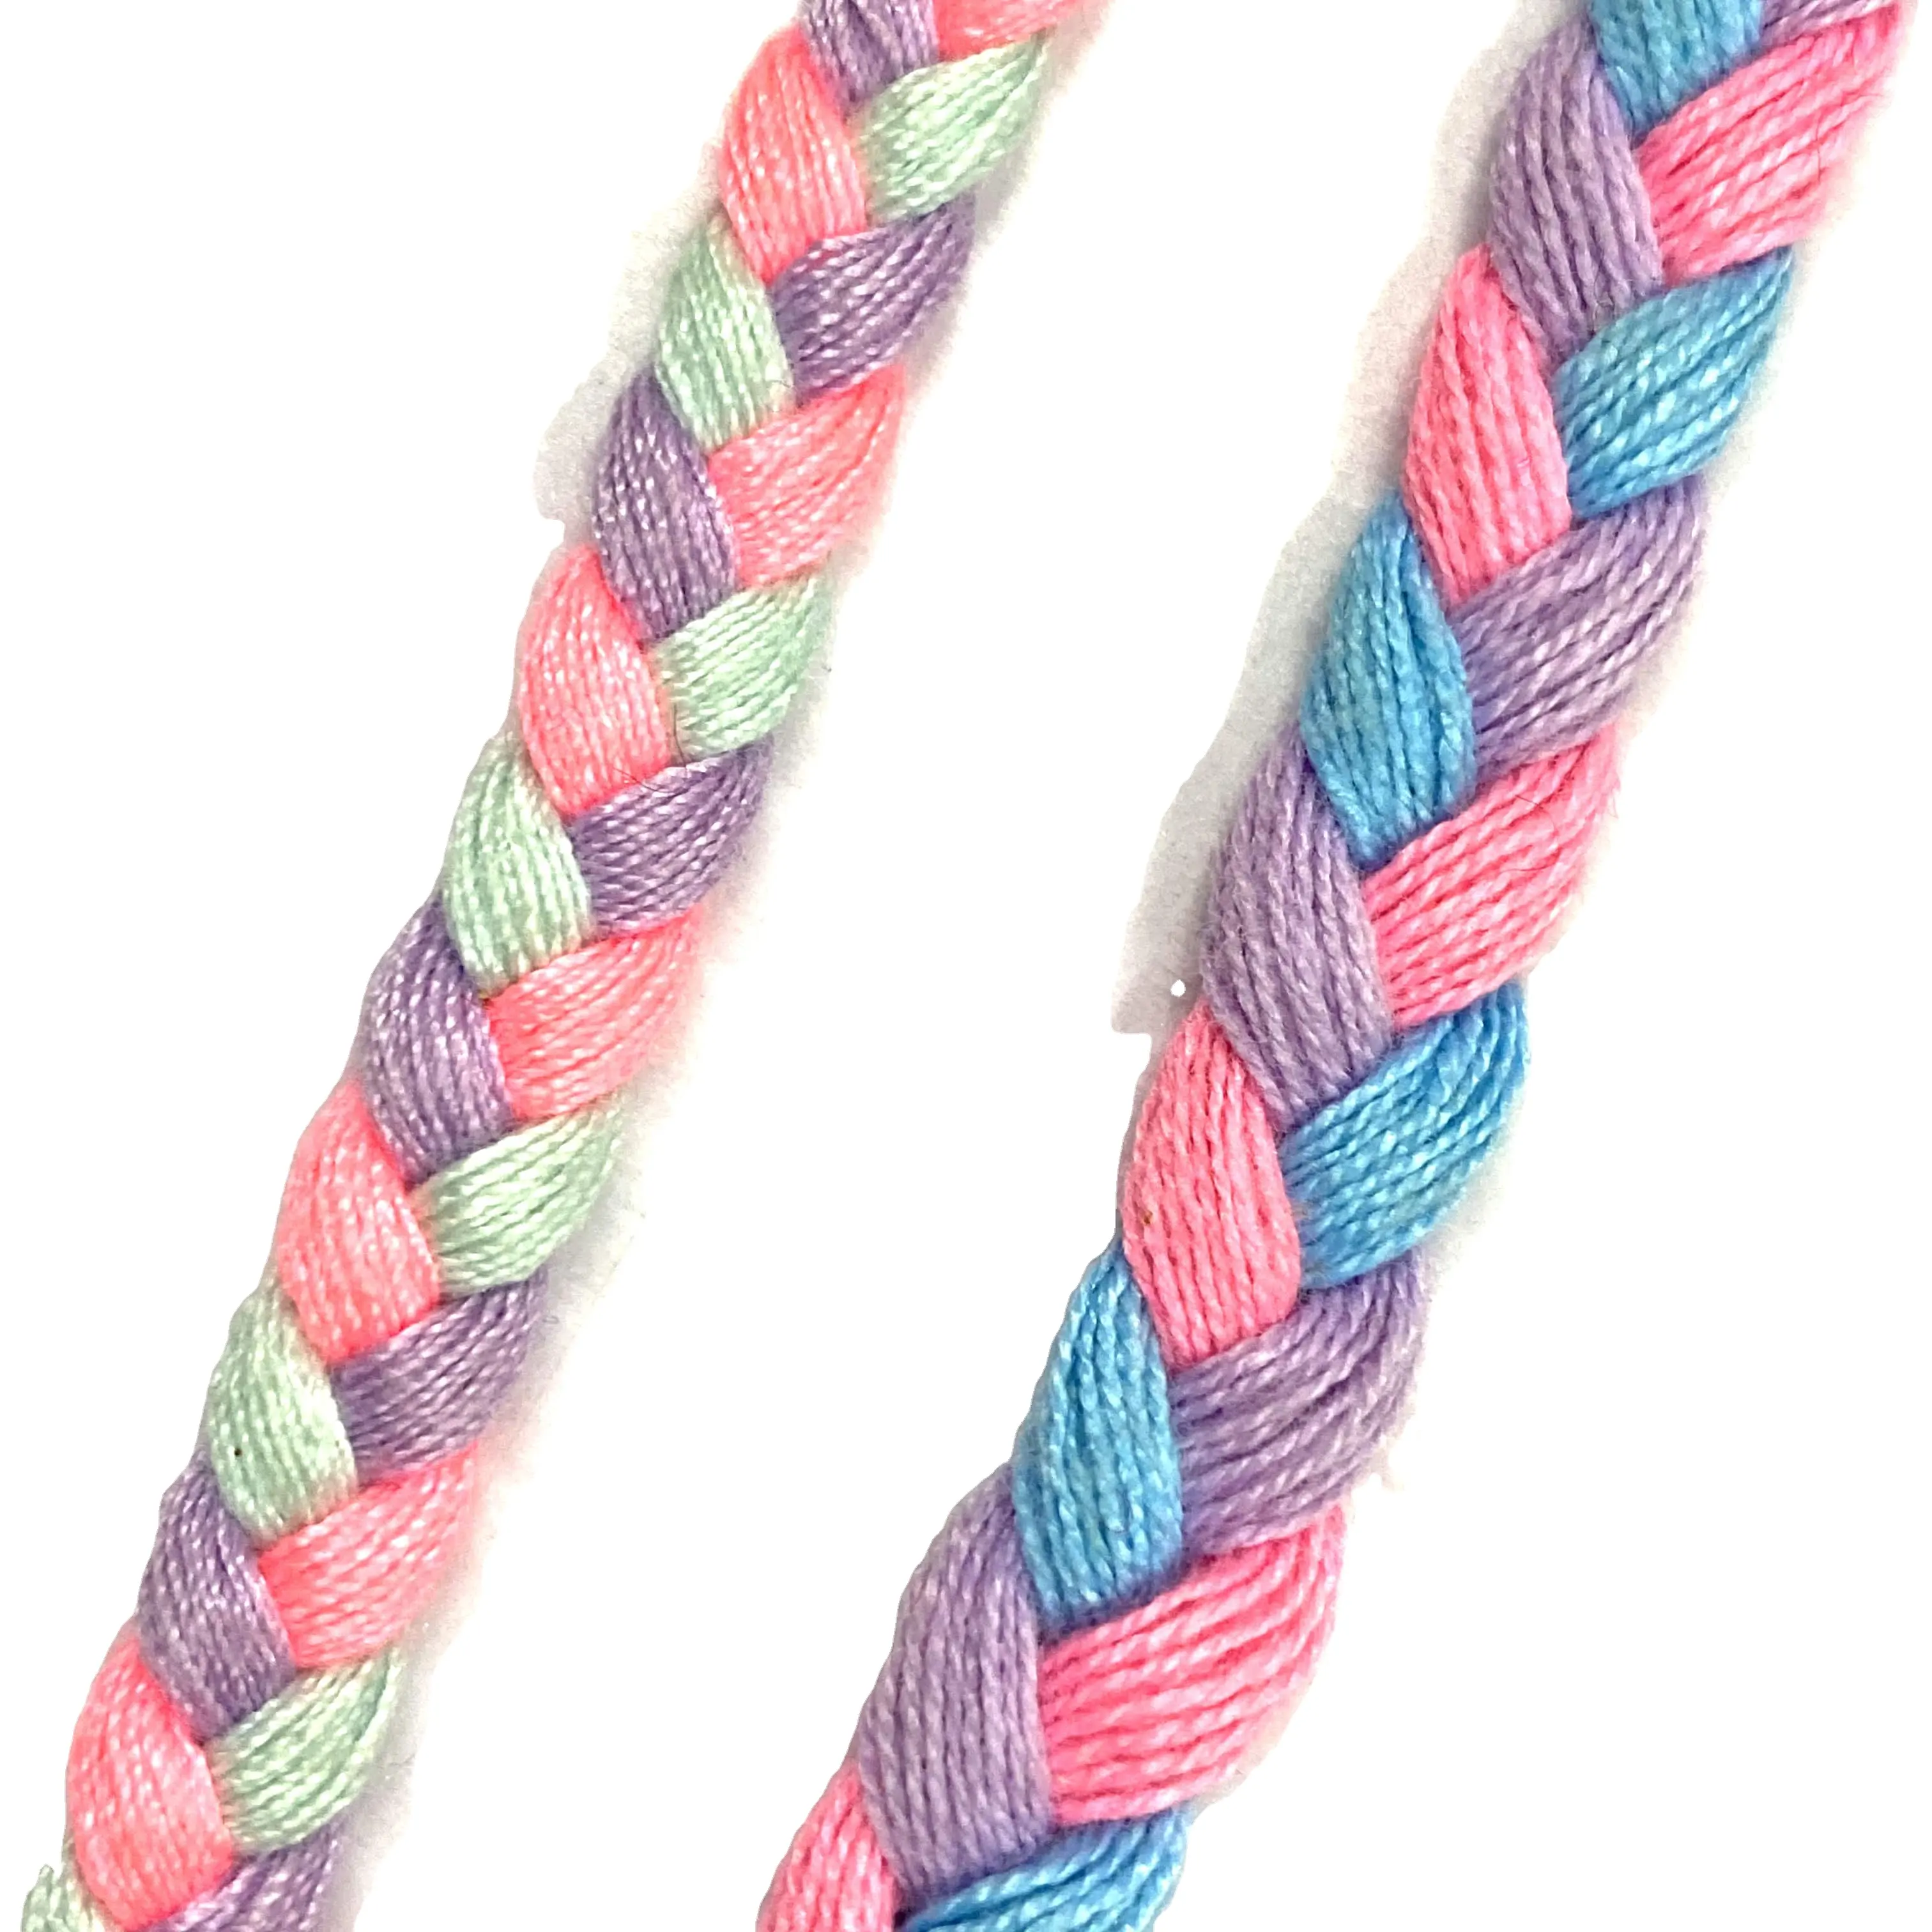 Honor Twist Cords 5mm Size in 20 Colors Twisted Silk Cord Decorative Twisted Cords Graduation Tassels Cord